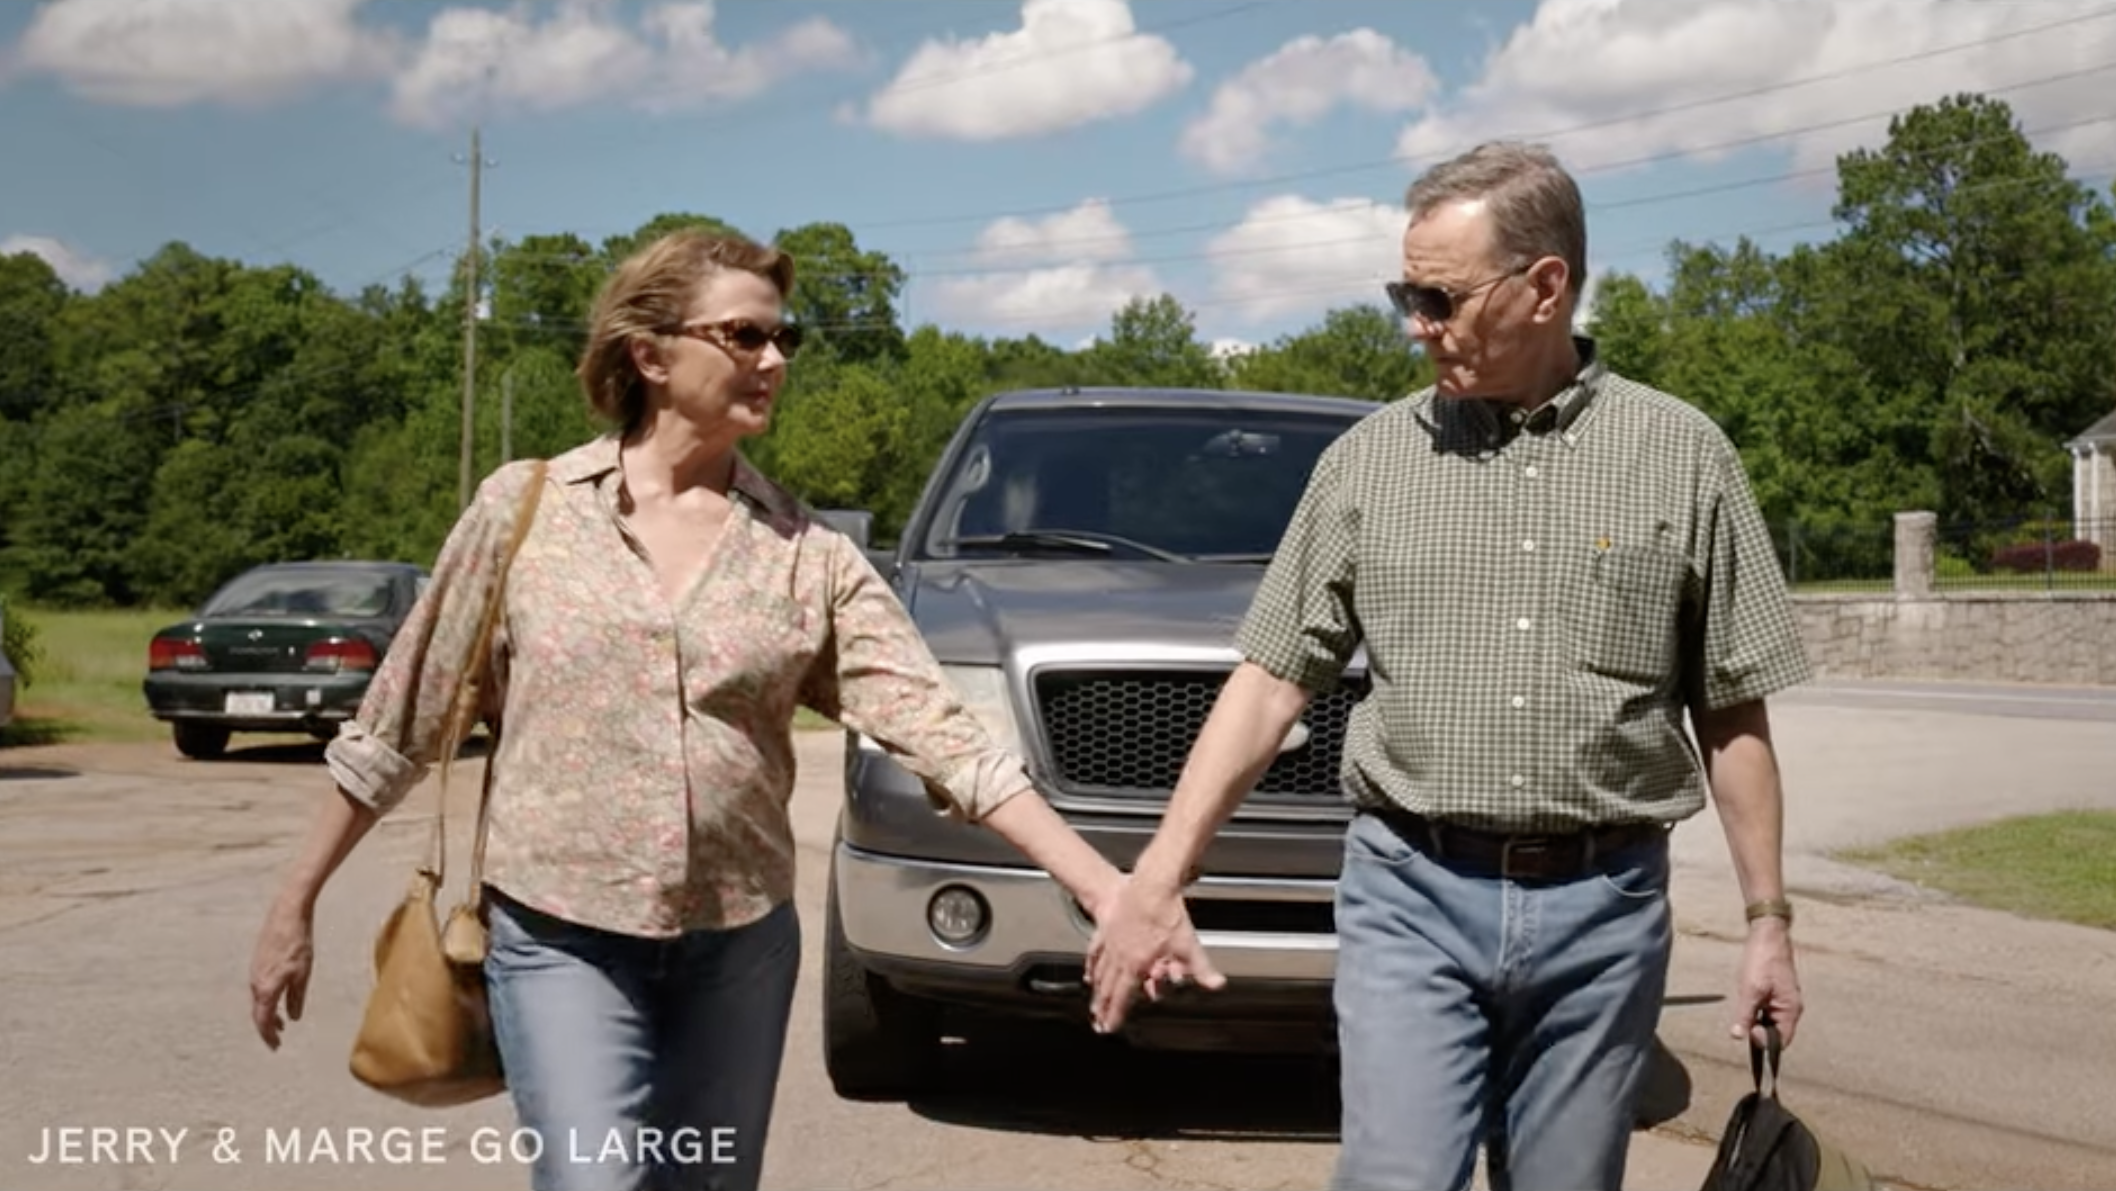 Bryan Cranston and Annette Bening game the system in Jerry & Marge Go Large trailer